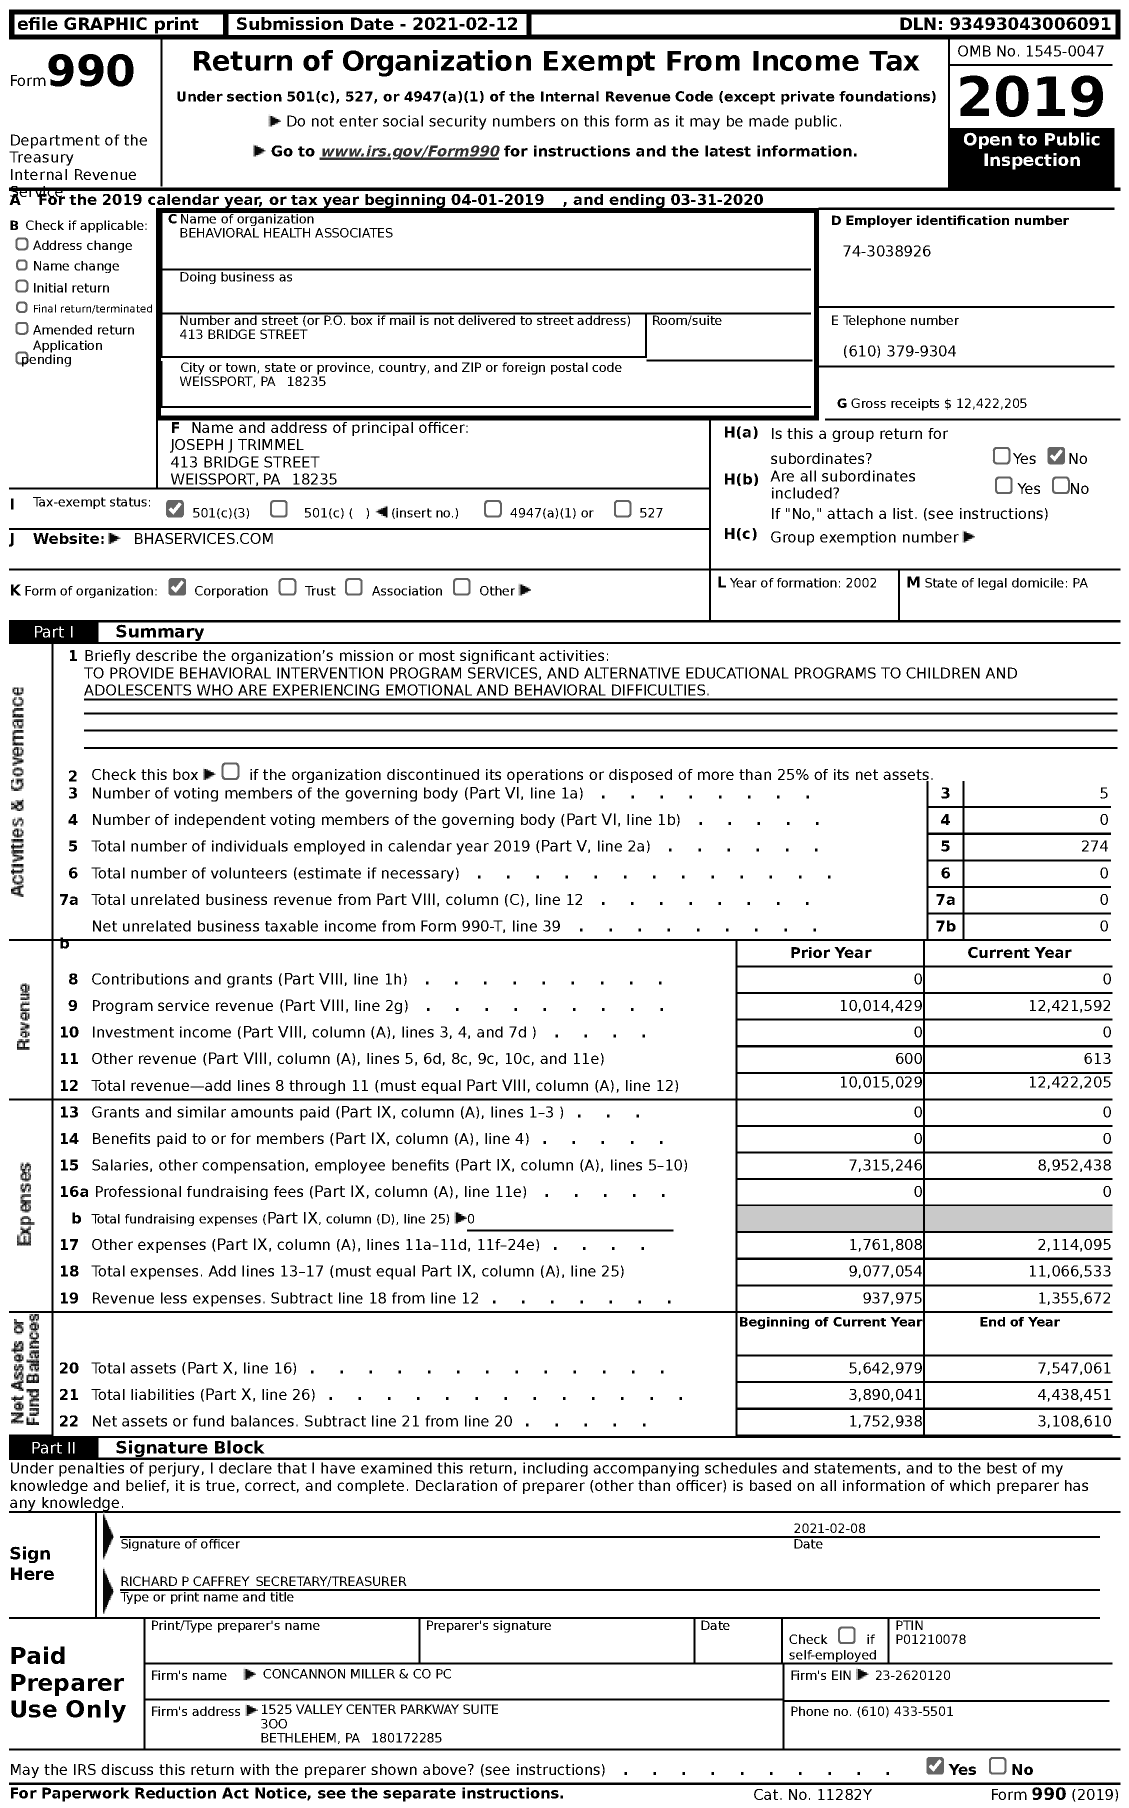 Image of first page of 2019 Form 990 for Behavioral Health Associates (BHA)